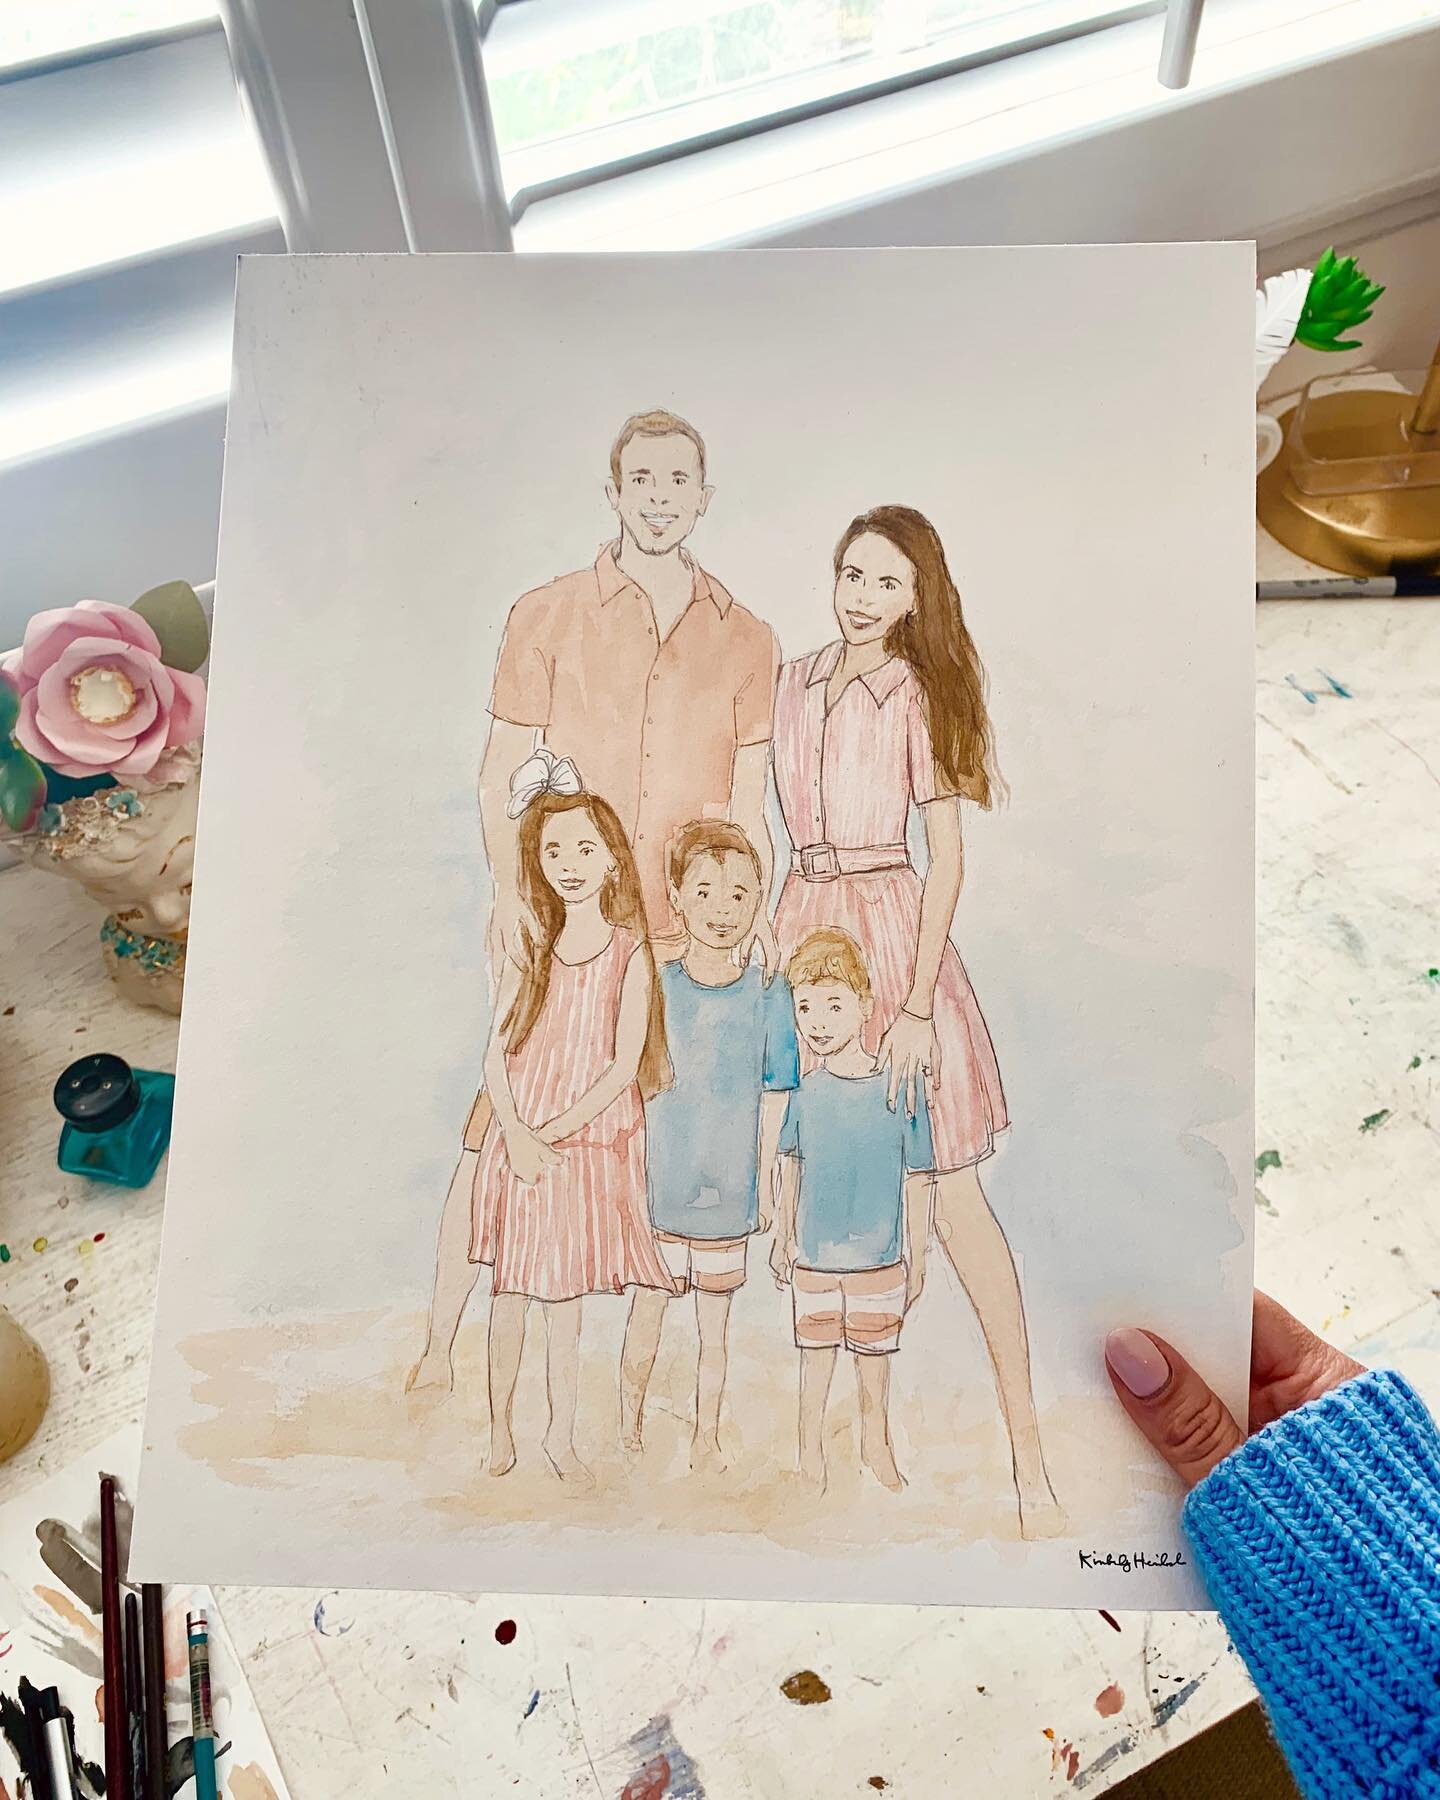 I&rsquo;m curious, what are you doing with your family this weekend? Looking for new ideas for spring outings!
Family watercolor paintings are available in my shop, visit the link in my profile www.ladyfolkstudio.com
#family #saturday #springbreak #f